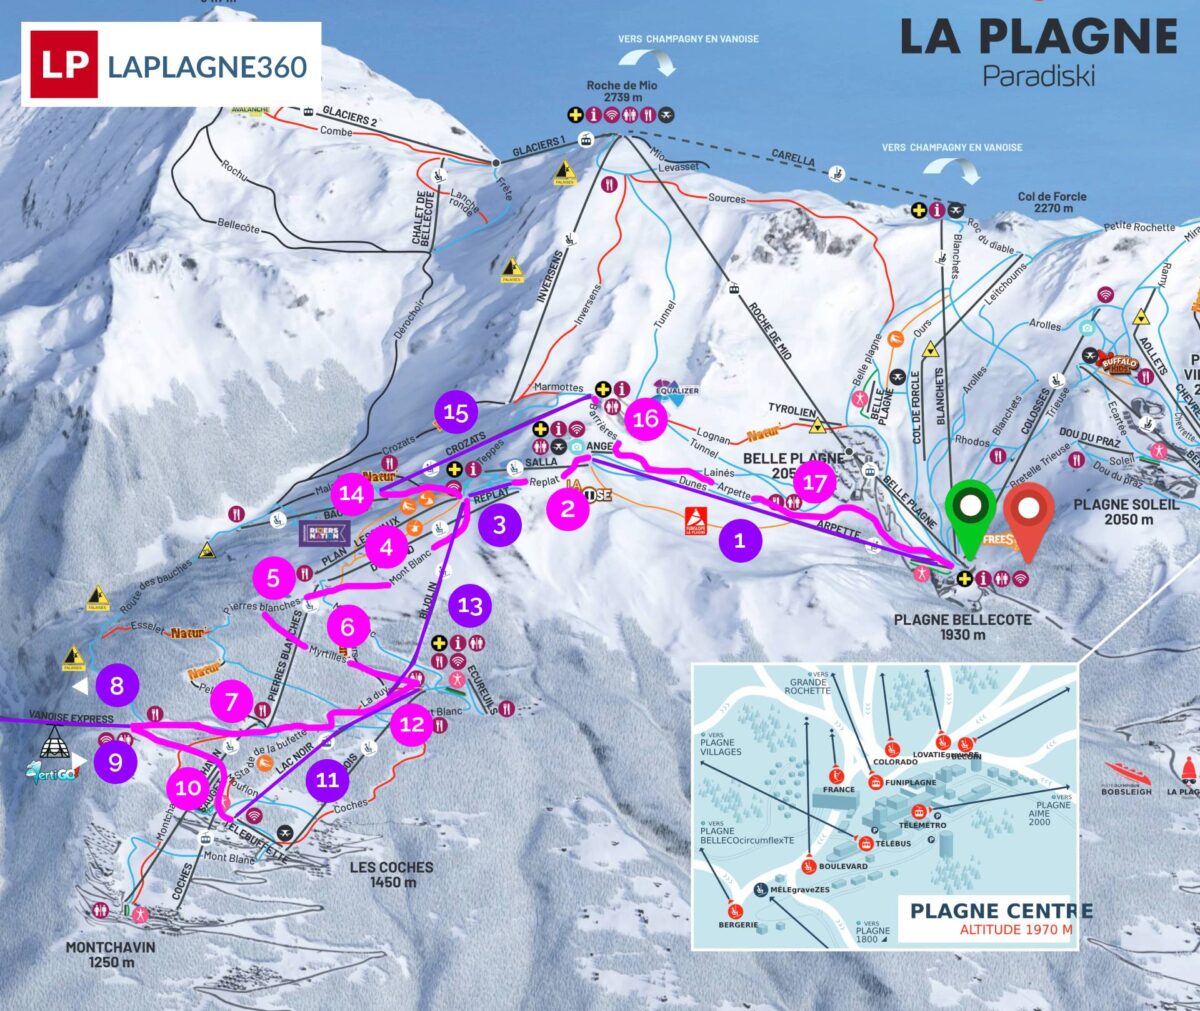 Downloadable piste map of the route to get to Les Arcs from La Plagne